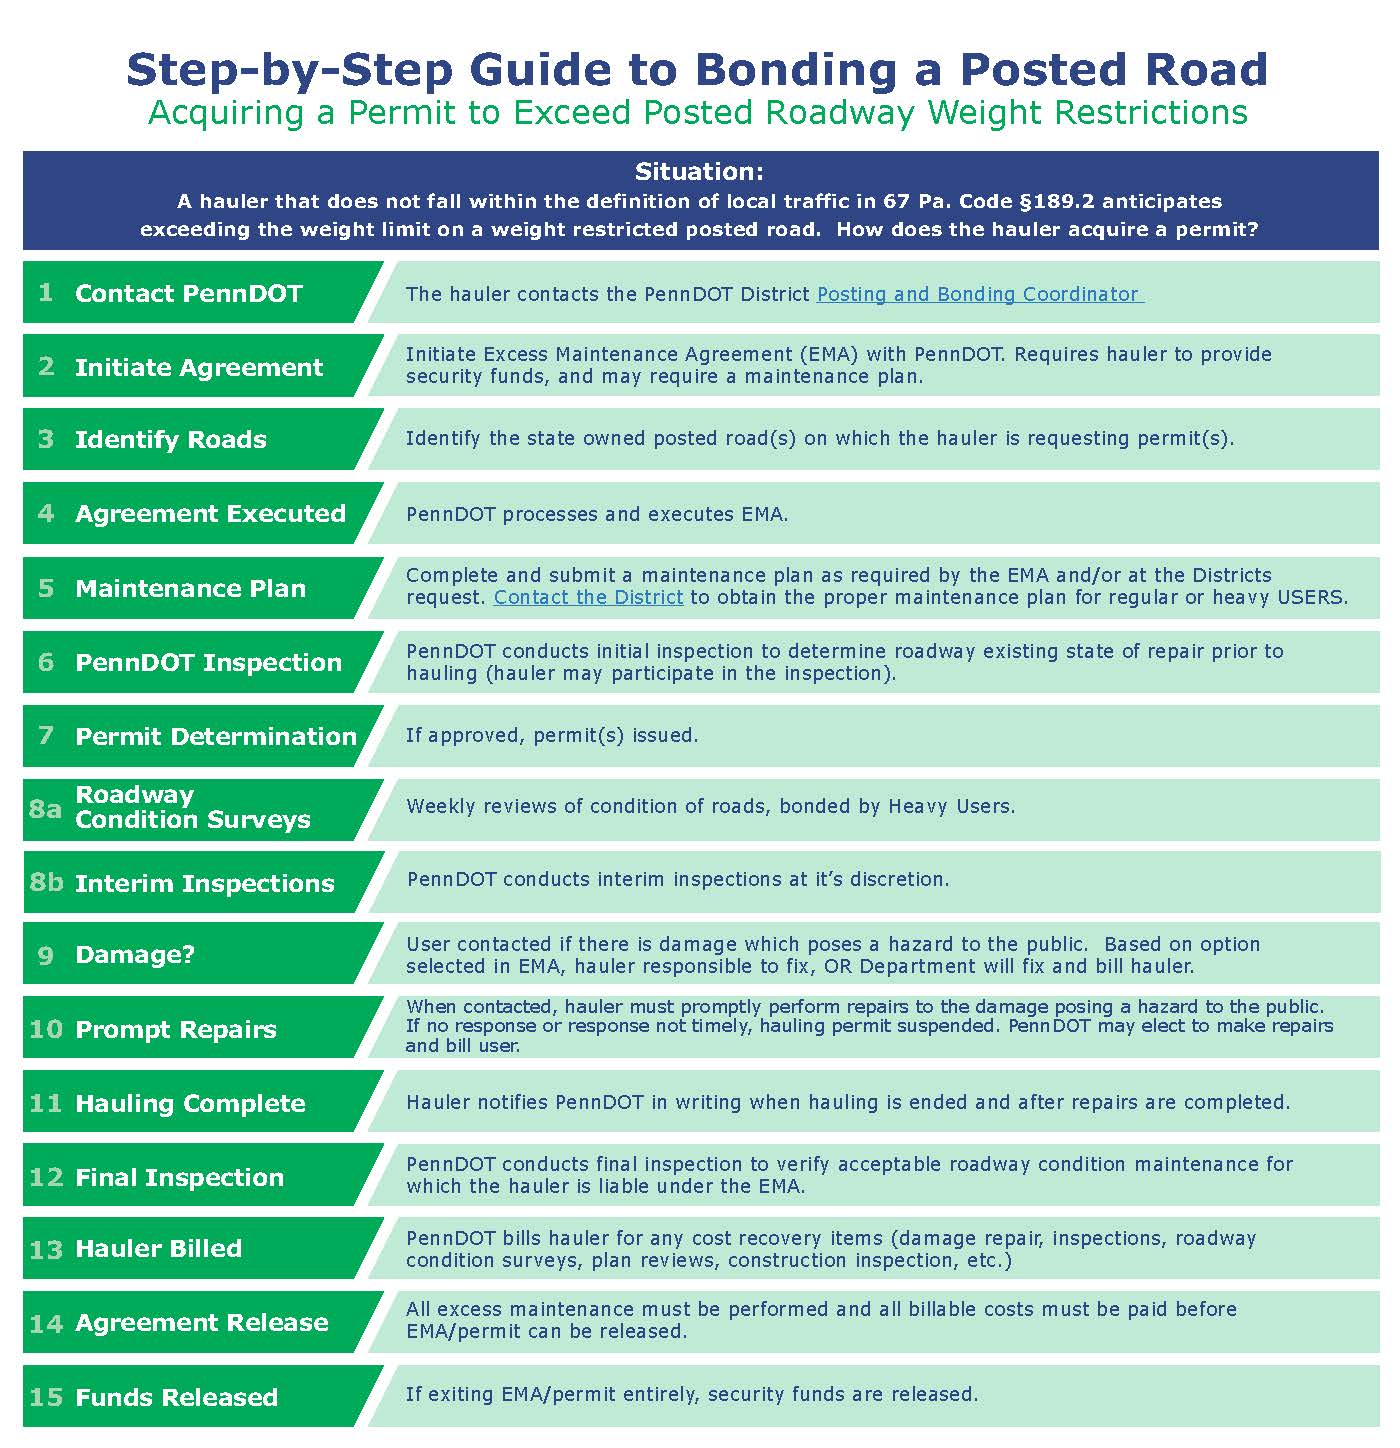 Step-by-Step Guide to Bonding a Posted Road